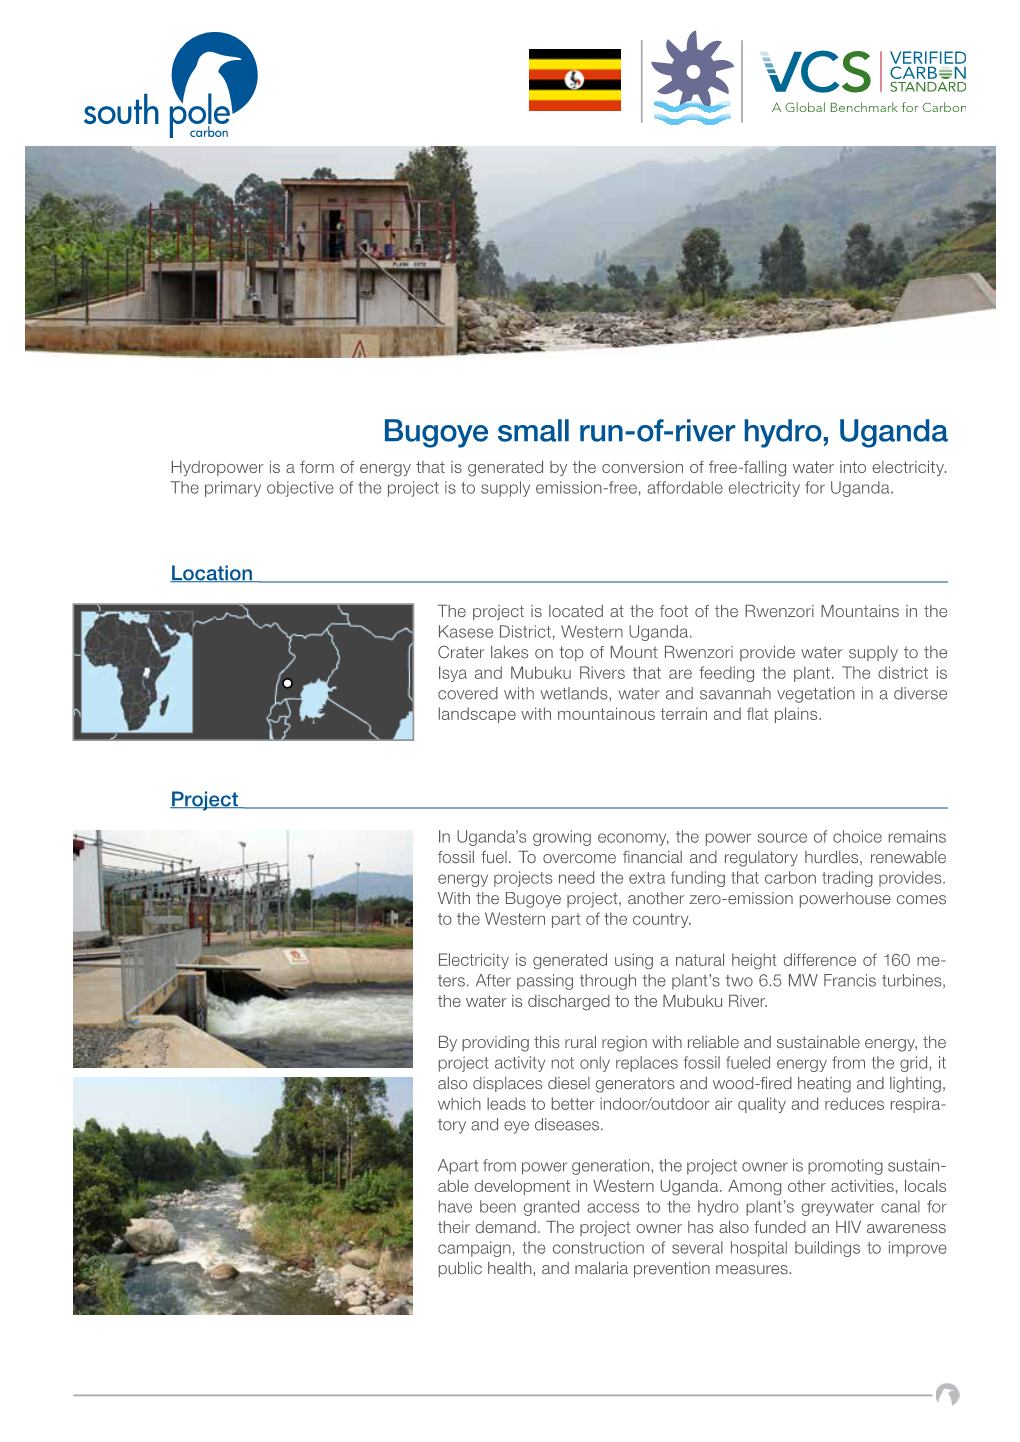 Bugoye Small Run-Of-River Hydro, Uganda Hydropower Is a Form of Energy That Is Generated by the Conversion of Free-Falling Water Into Electricity